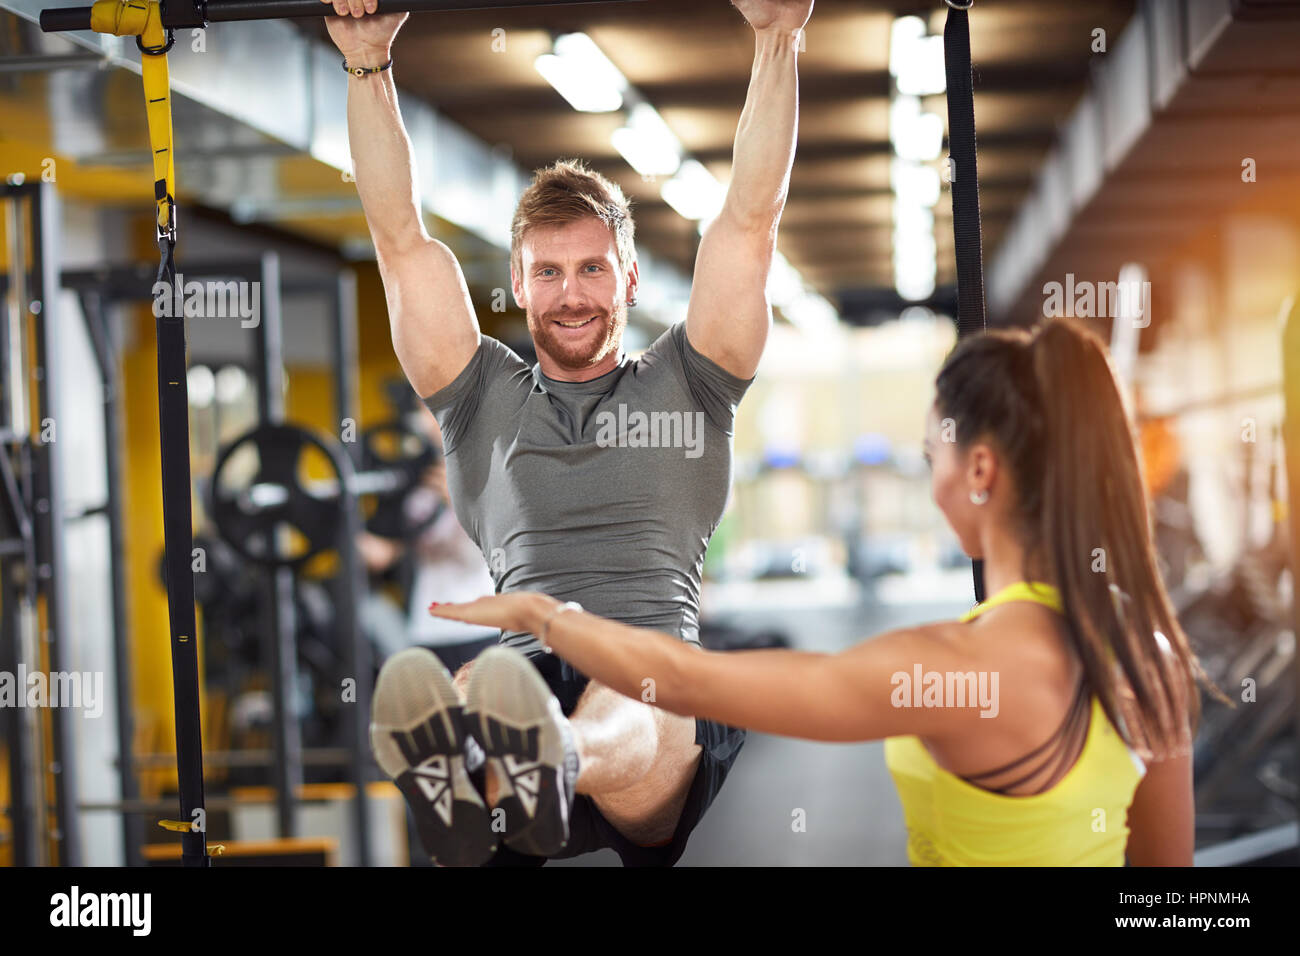 Male doing pull-up exercise with coach assisting in fitness club Stock Photo